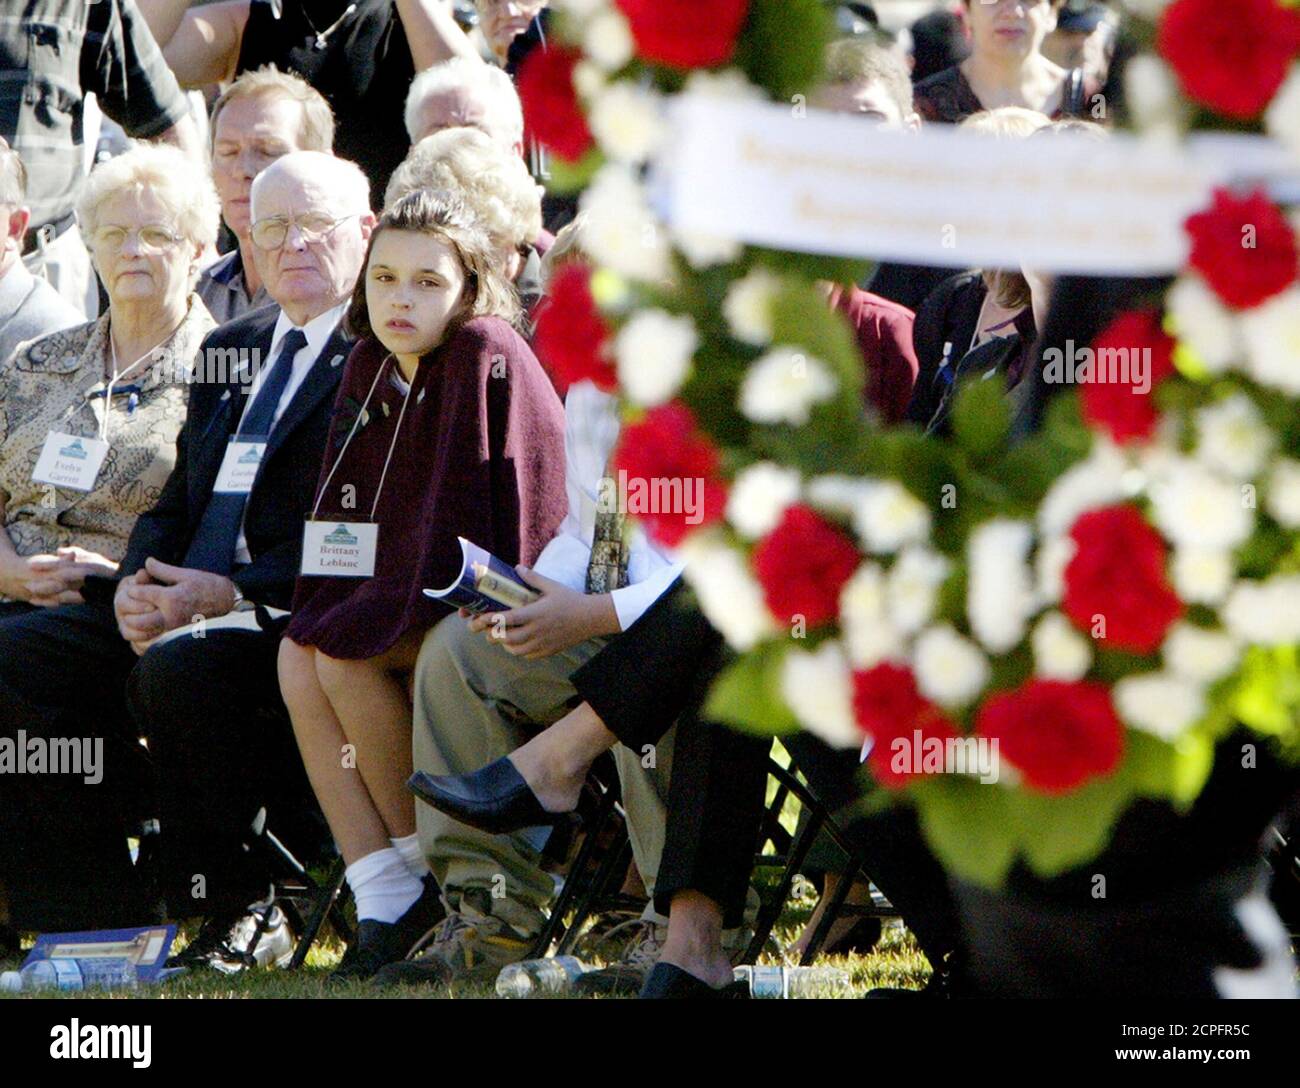 Evelyn Garrett and Gordon Garrett, parents of deceased Cobourg Police Constable Christopher Garrett, watch along with Constable Garrett's stepdaughter, Brittany Leblanc, as a wreath is laid during the 27th Annual Police Memorial Service.  Evelyn Garrett (L) and Gordon Garrett (C), parents of deceased Cobourg Police Constable Christopher Garrett, watch along with Constable Garrett's stepdaughter, Brittany Leblanc, as a wreath is laid during the 27th Annual Police Memorial Service on Parliament Hill in Ottawa, September 26, 2004. Constable Garret was murdered while answering an alleged robbery c Stock Photo